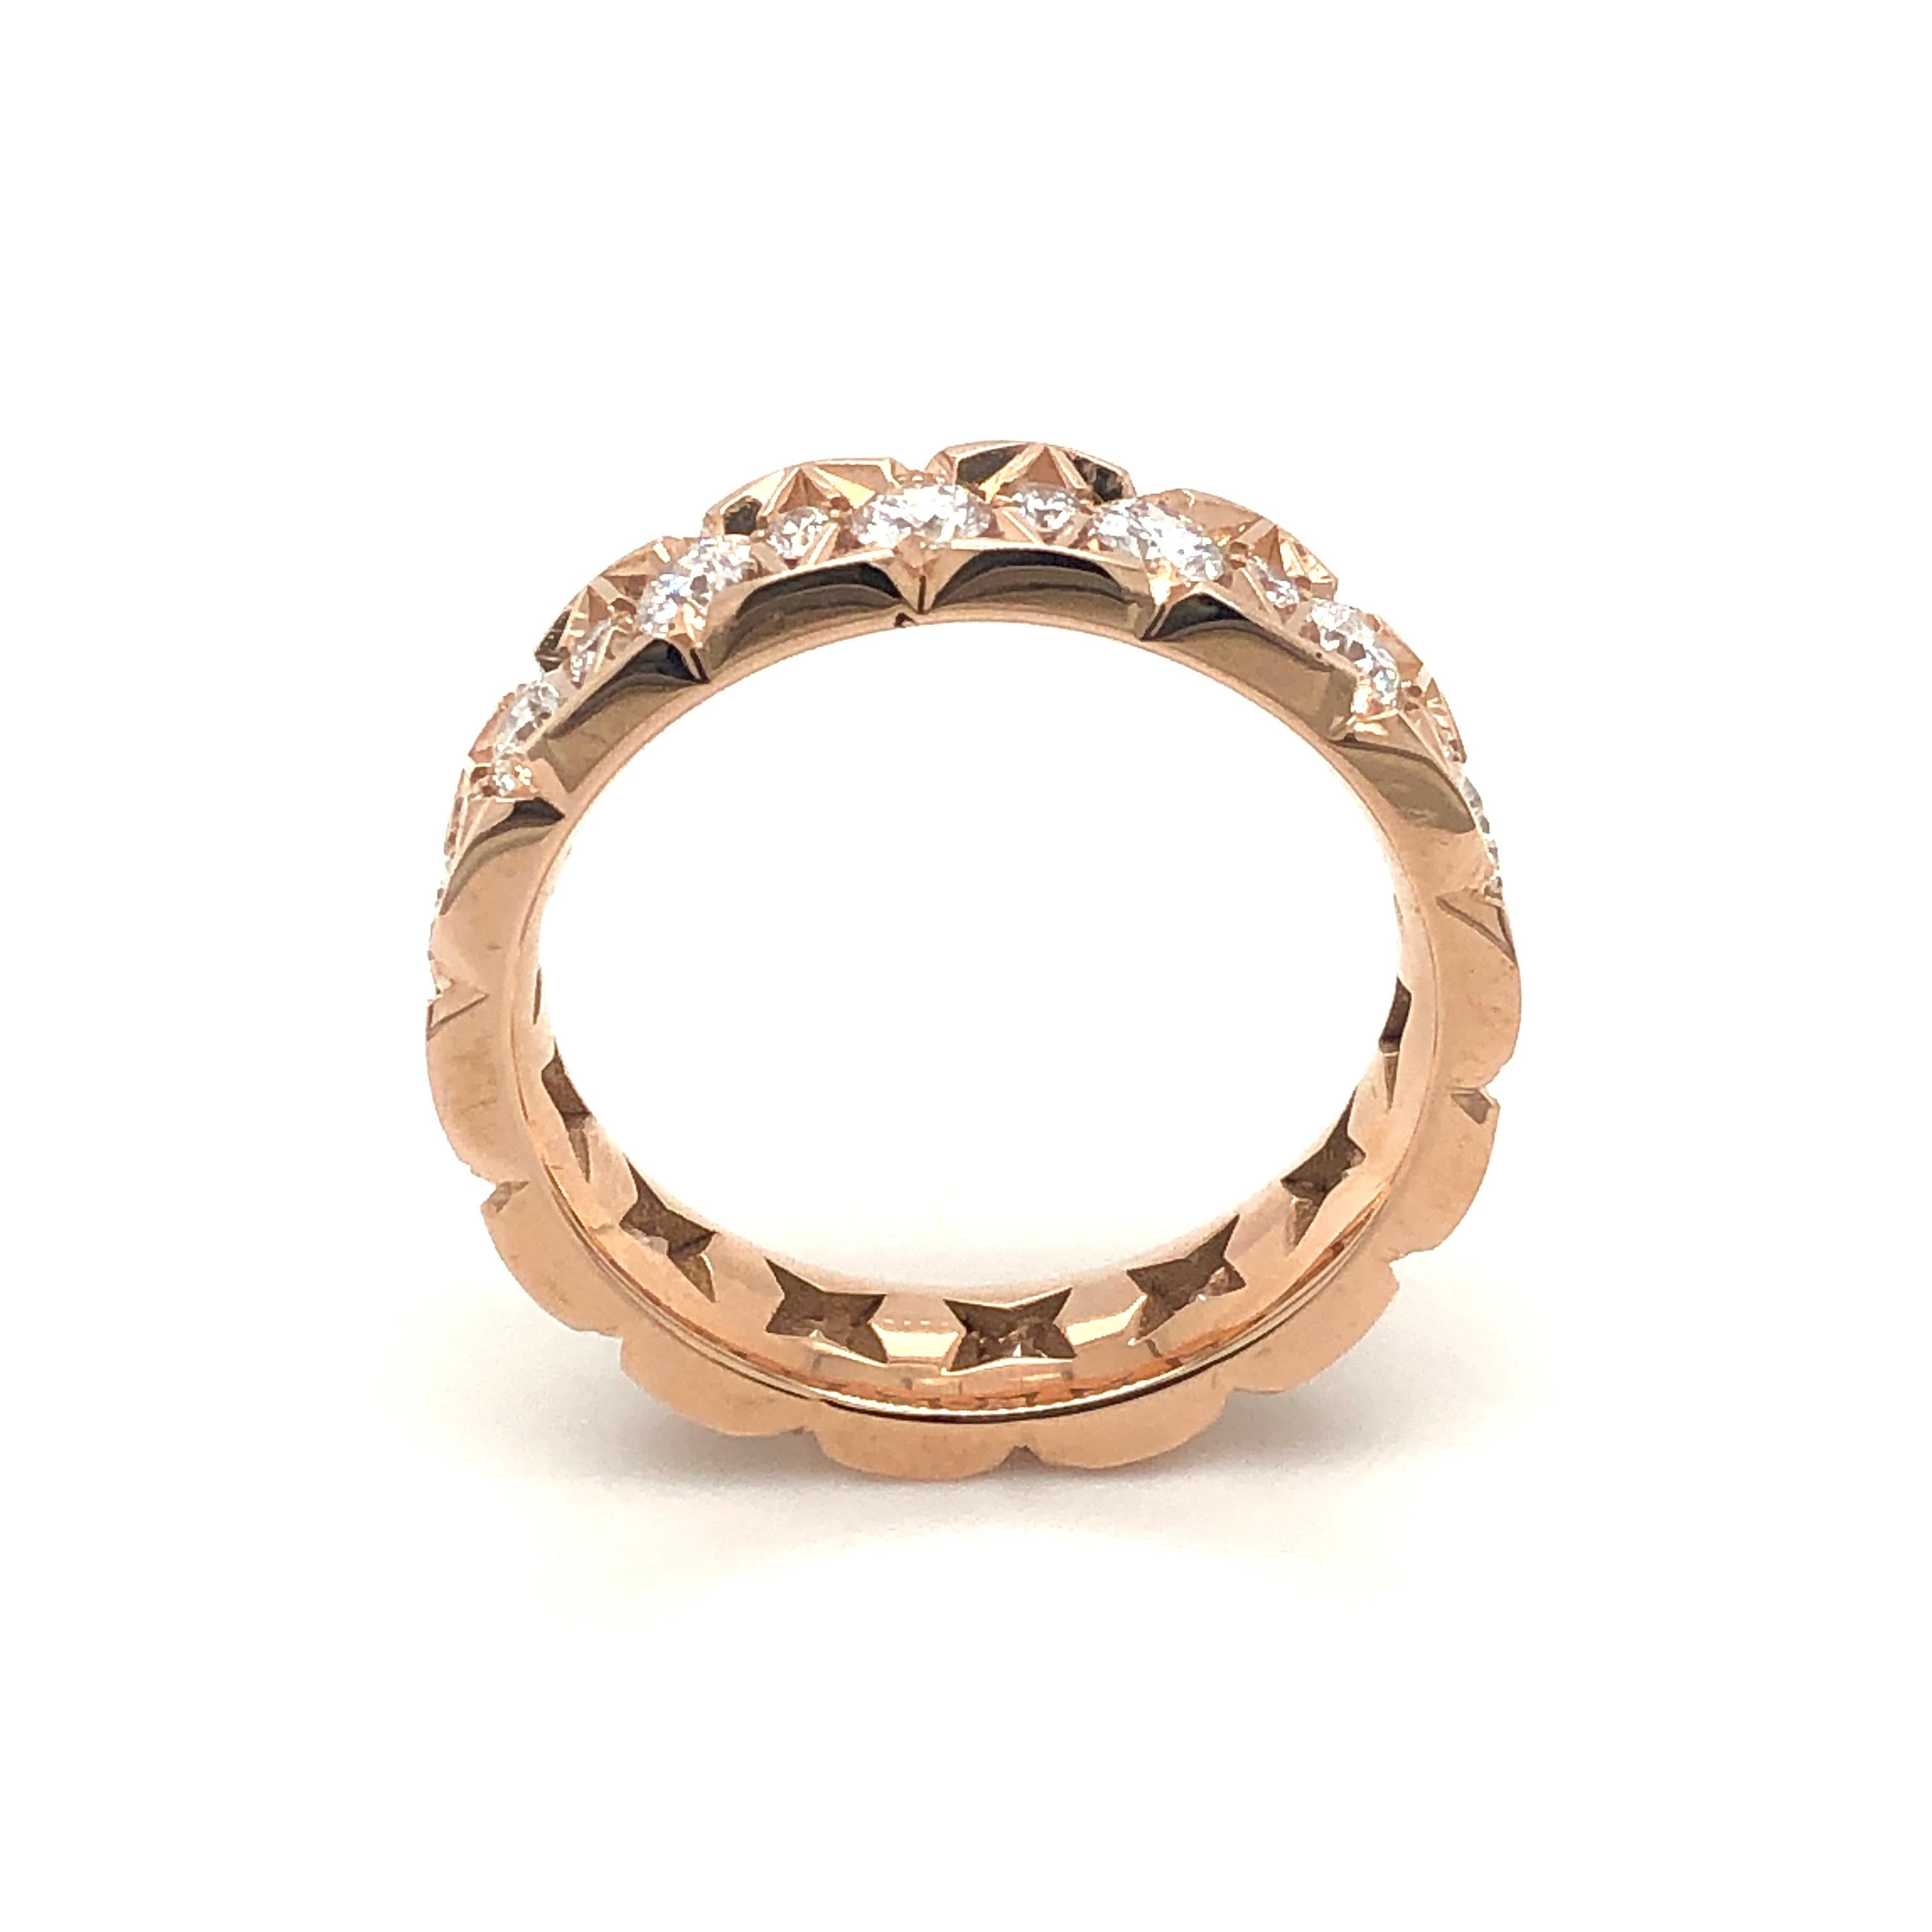 18 Karat Rose Gold Eternity Ring set with 1.371 Carat White Diamonds.
White Diamonds are brilliant cut.

This ring is available in Rose gold AND White gold (see in other listing)
Also beautiful worn together as one.
Or the perfect wedding ring if